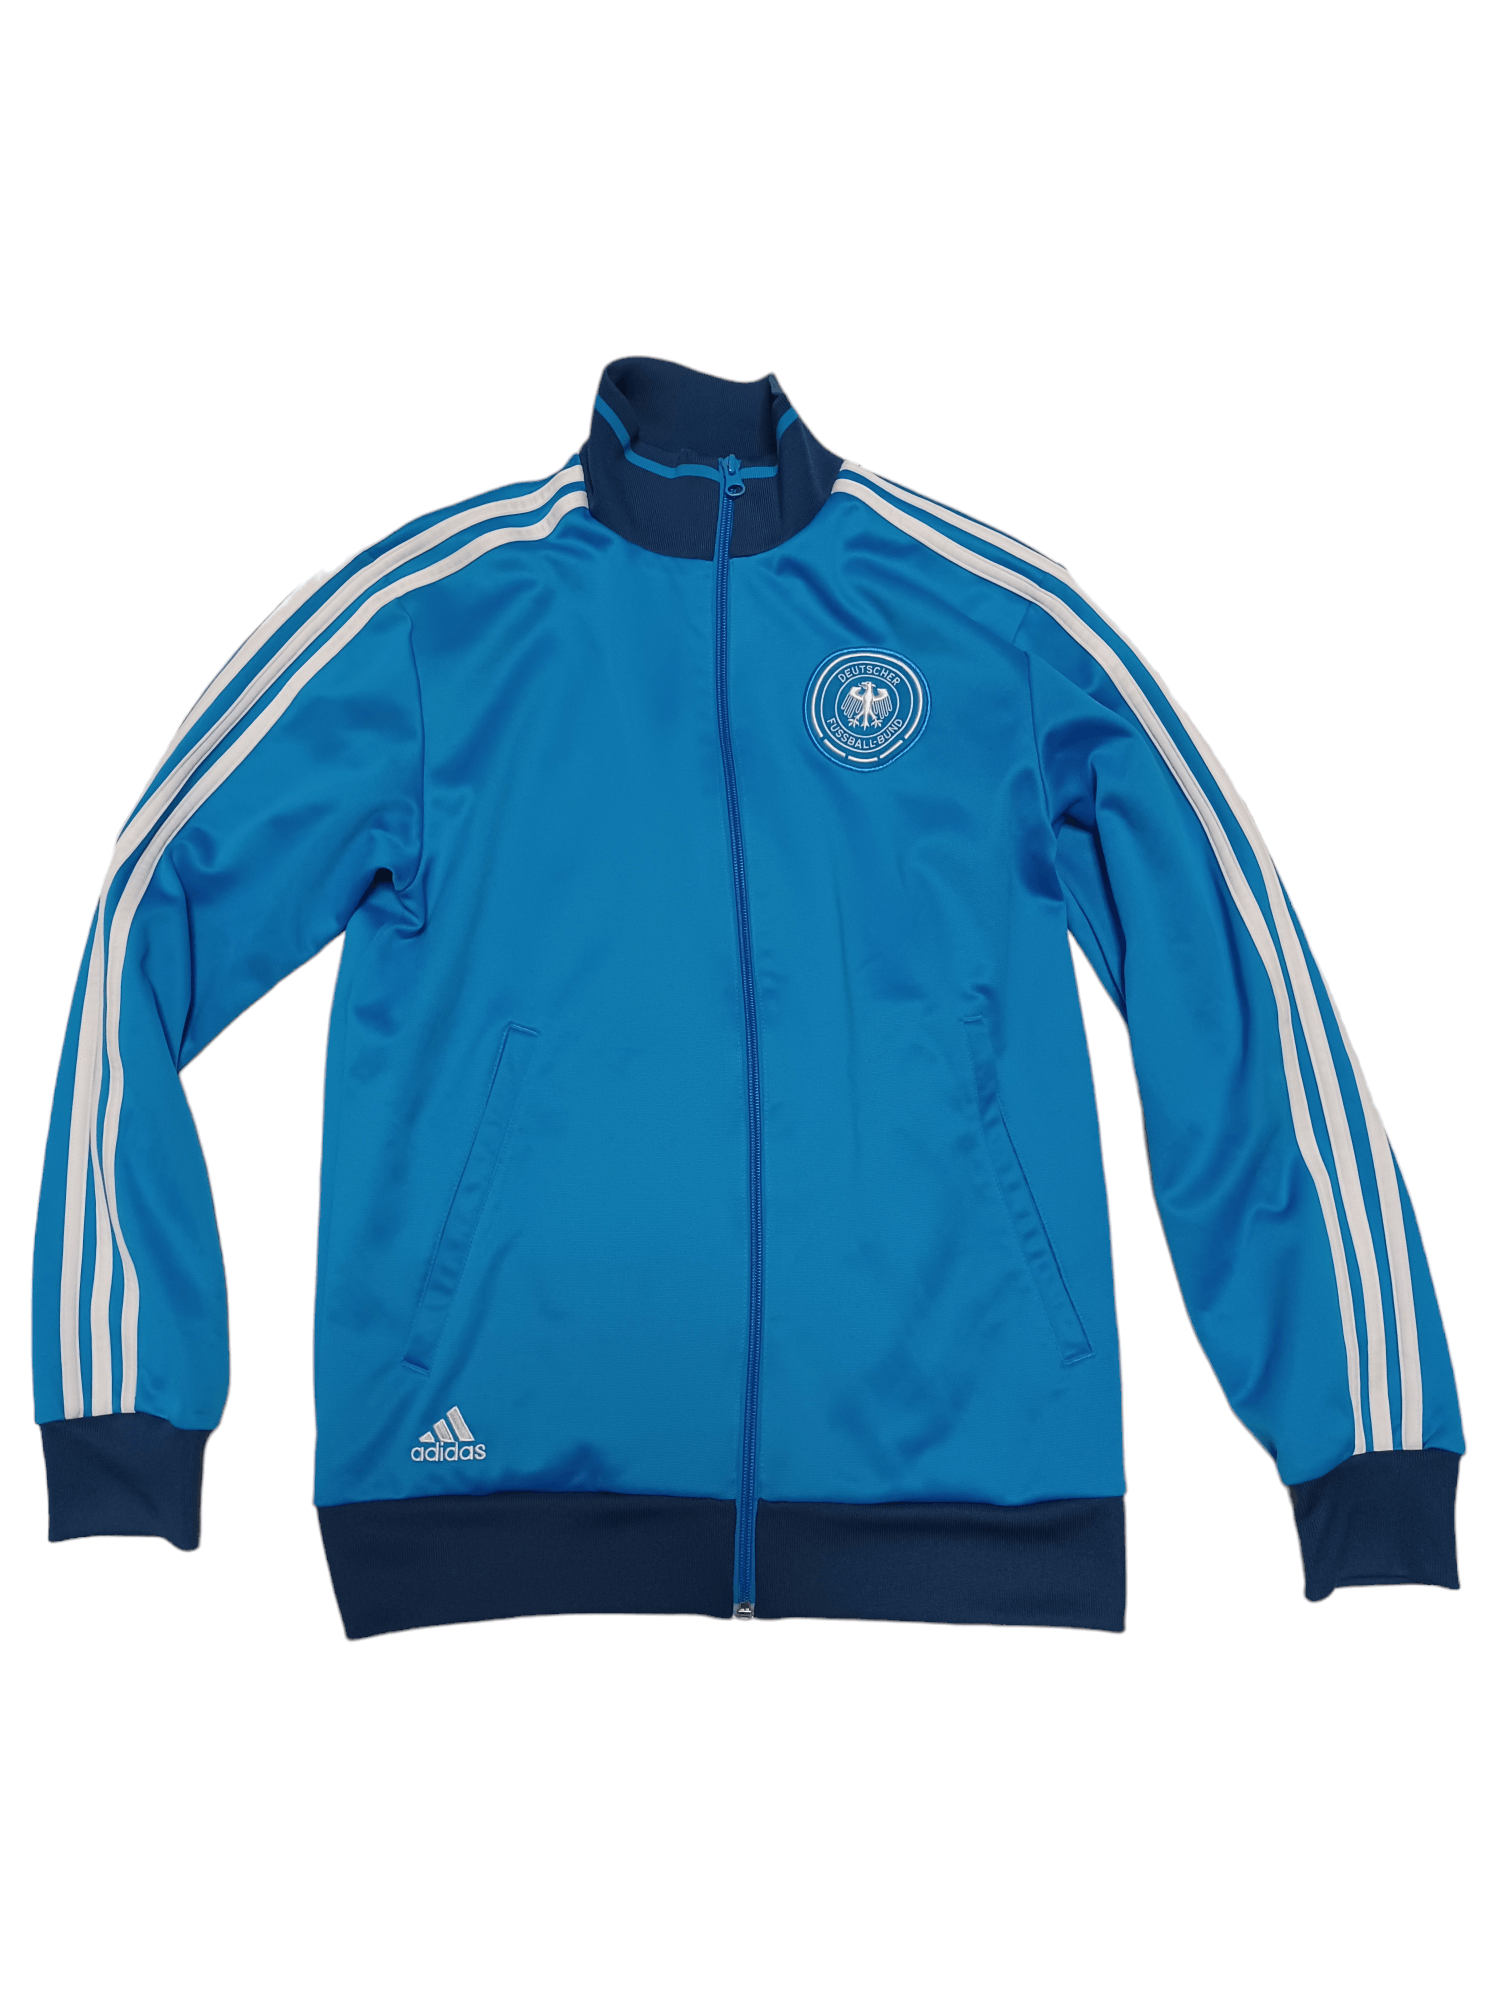 Pre-owned Adidas X Soccer Jersey Germany Deutschland National Team 2014 Tracking Jacket In Sky Blue